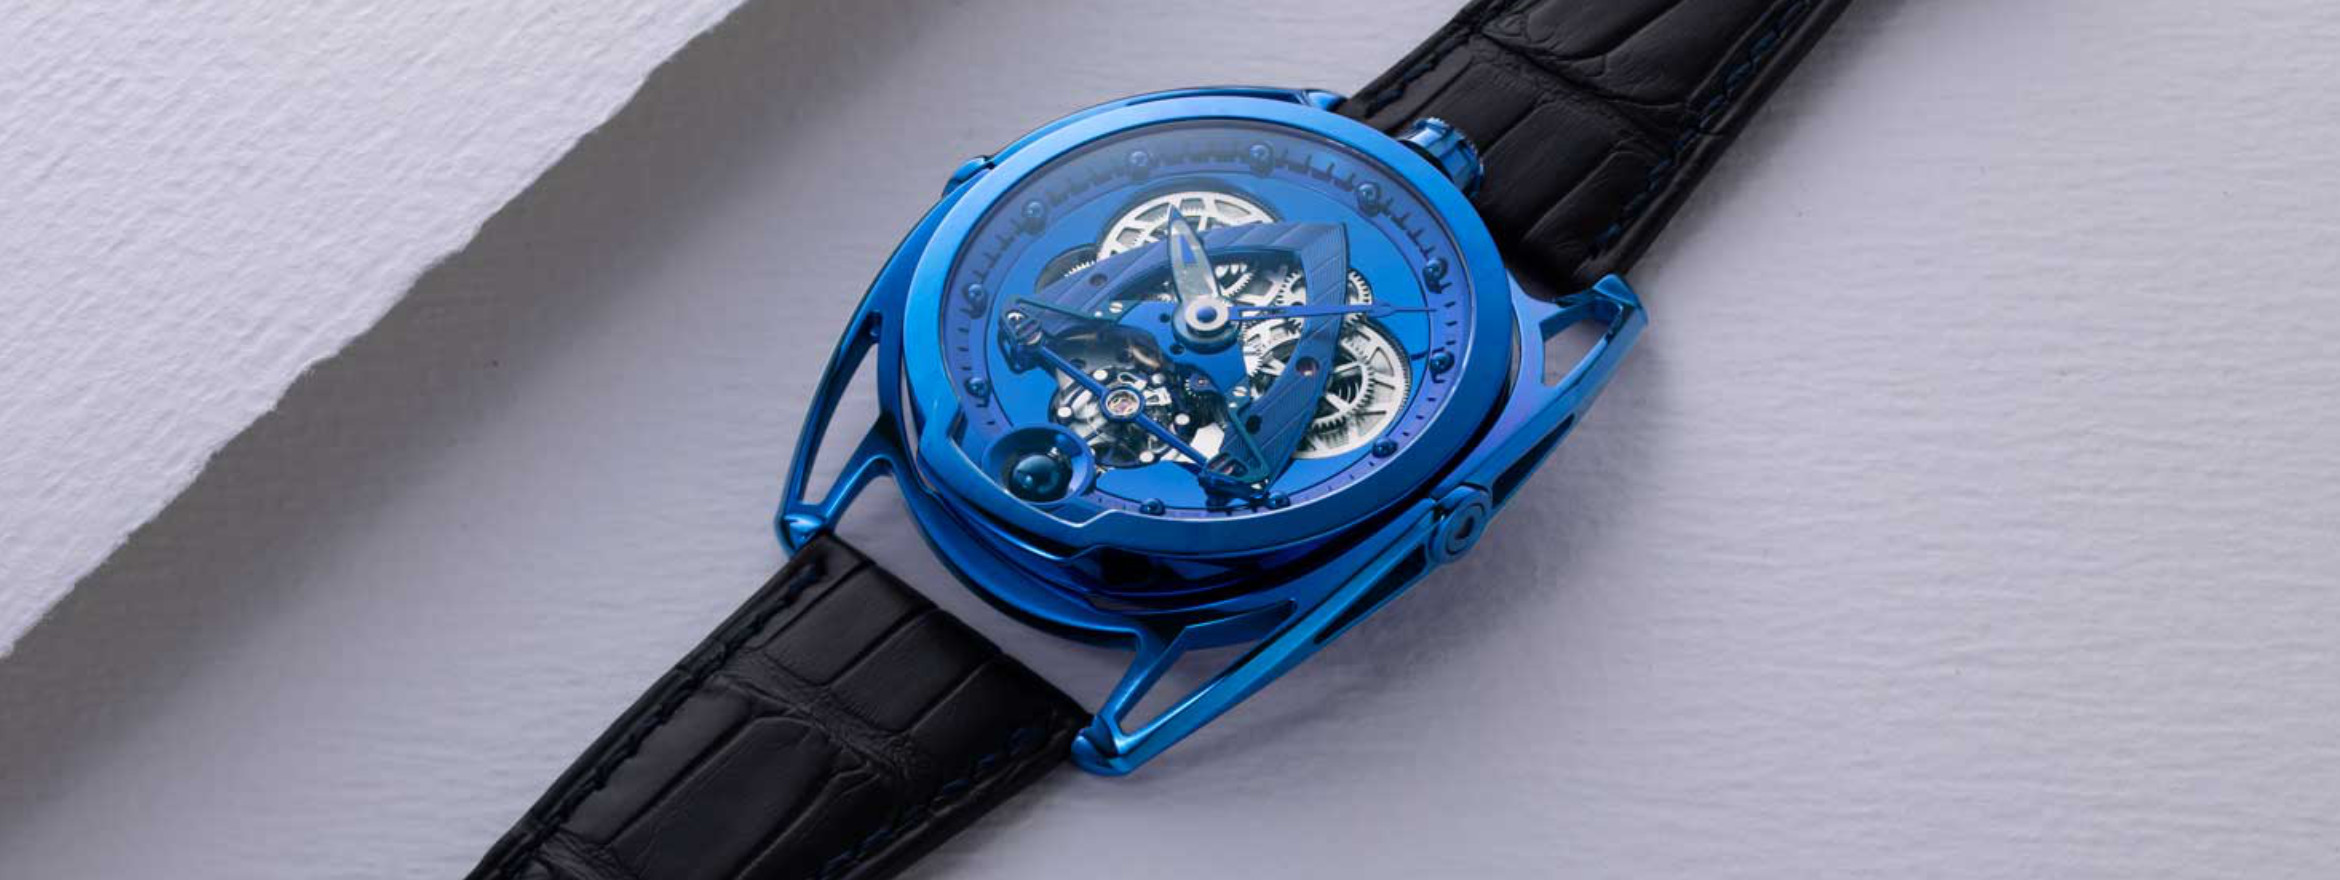 Introducing the DB28 Steel Wheels Blue: The Hour Glass Commemorative Edition